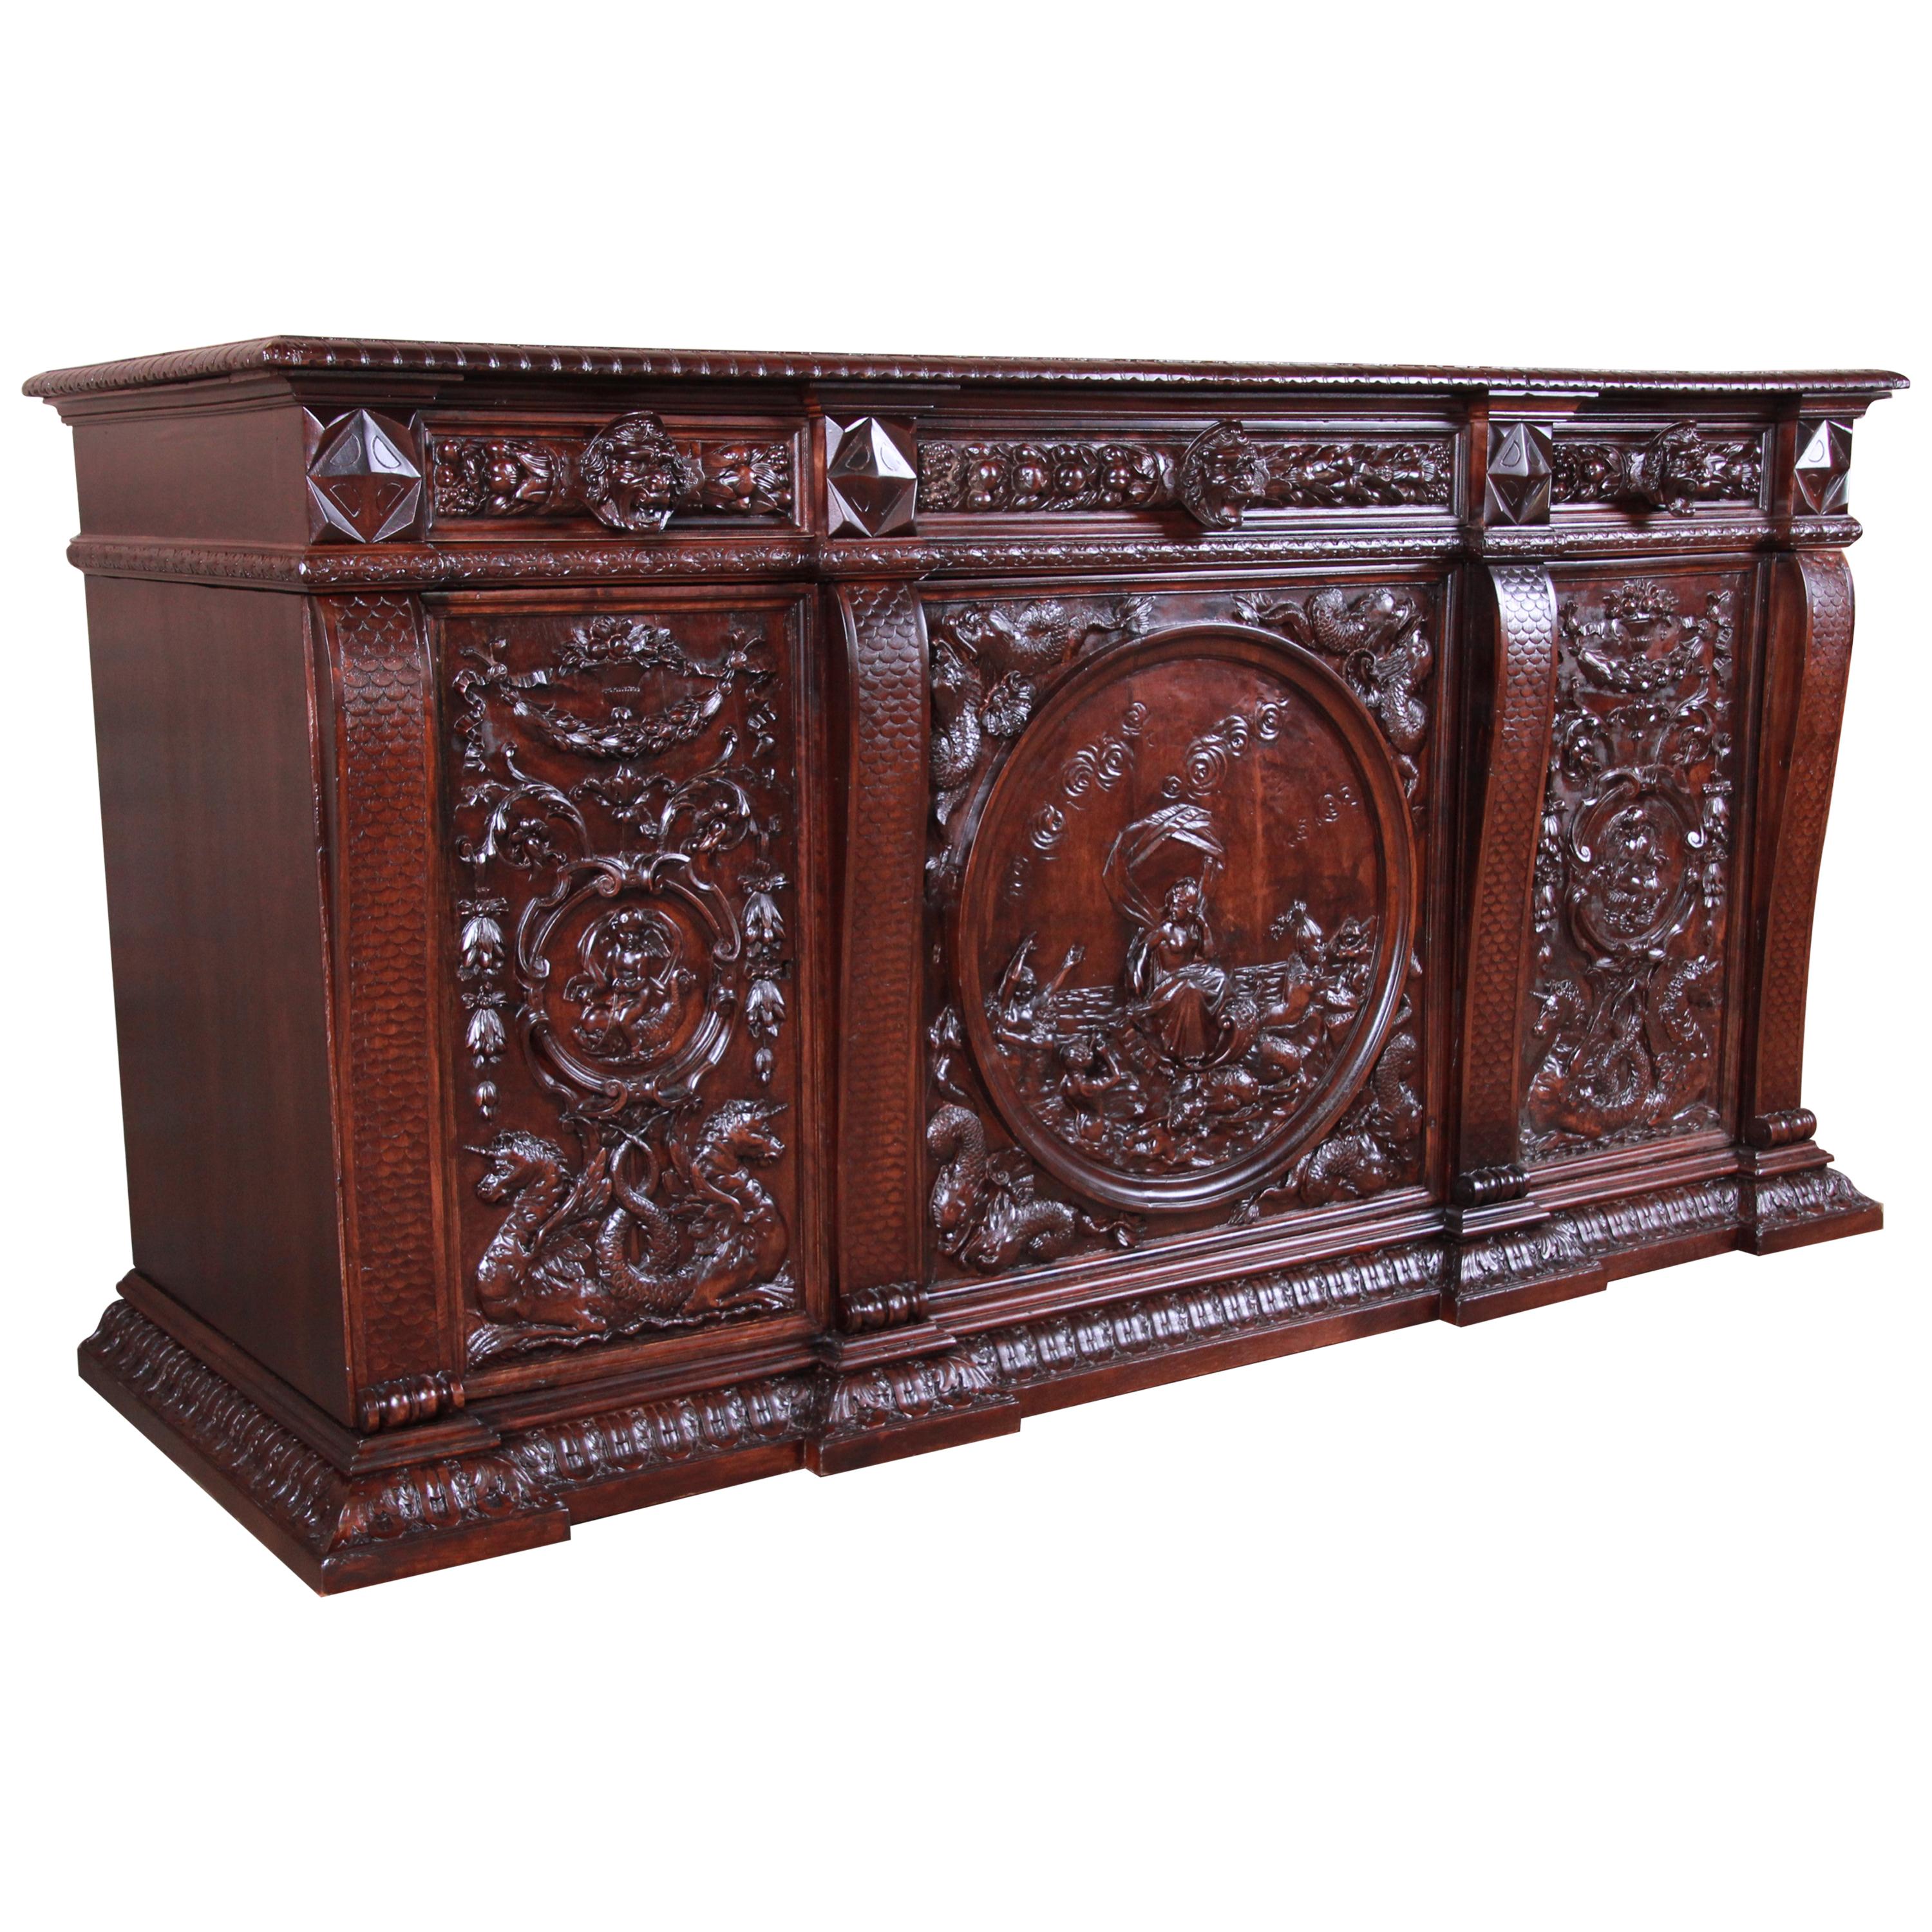 19th Century Walnut Sideboard or Bar Cabinet Attributed to RJ Horner, Restored